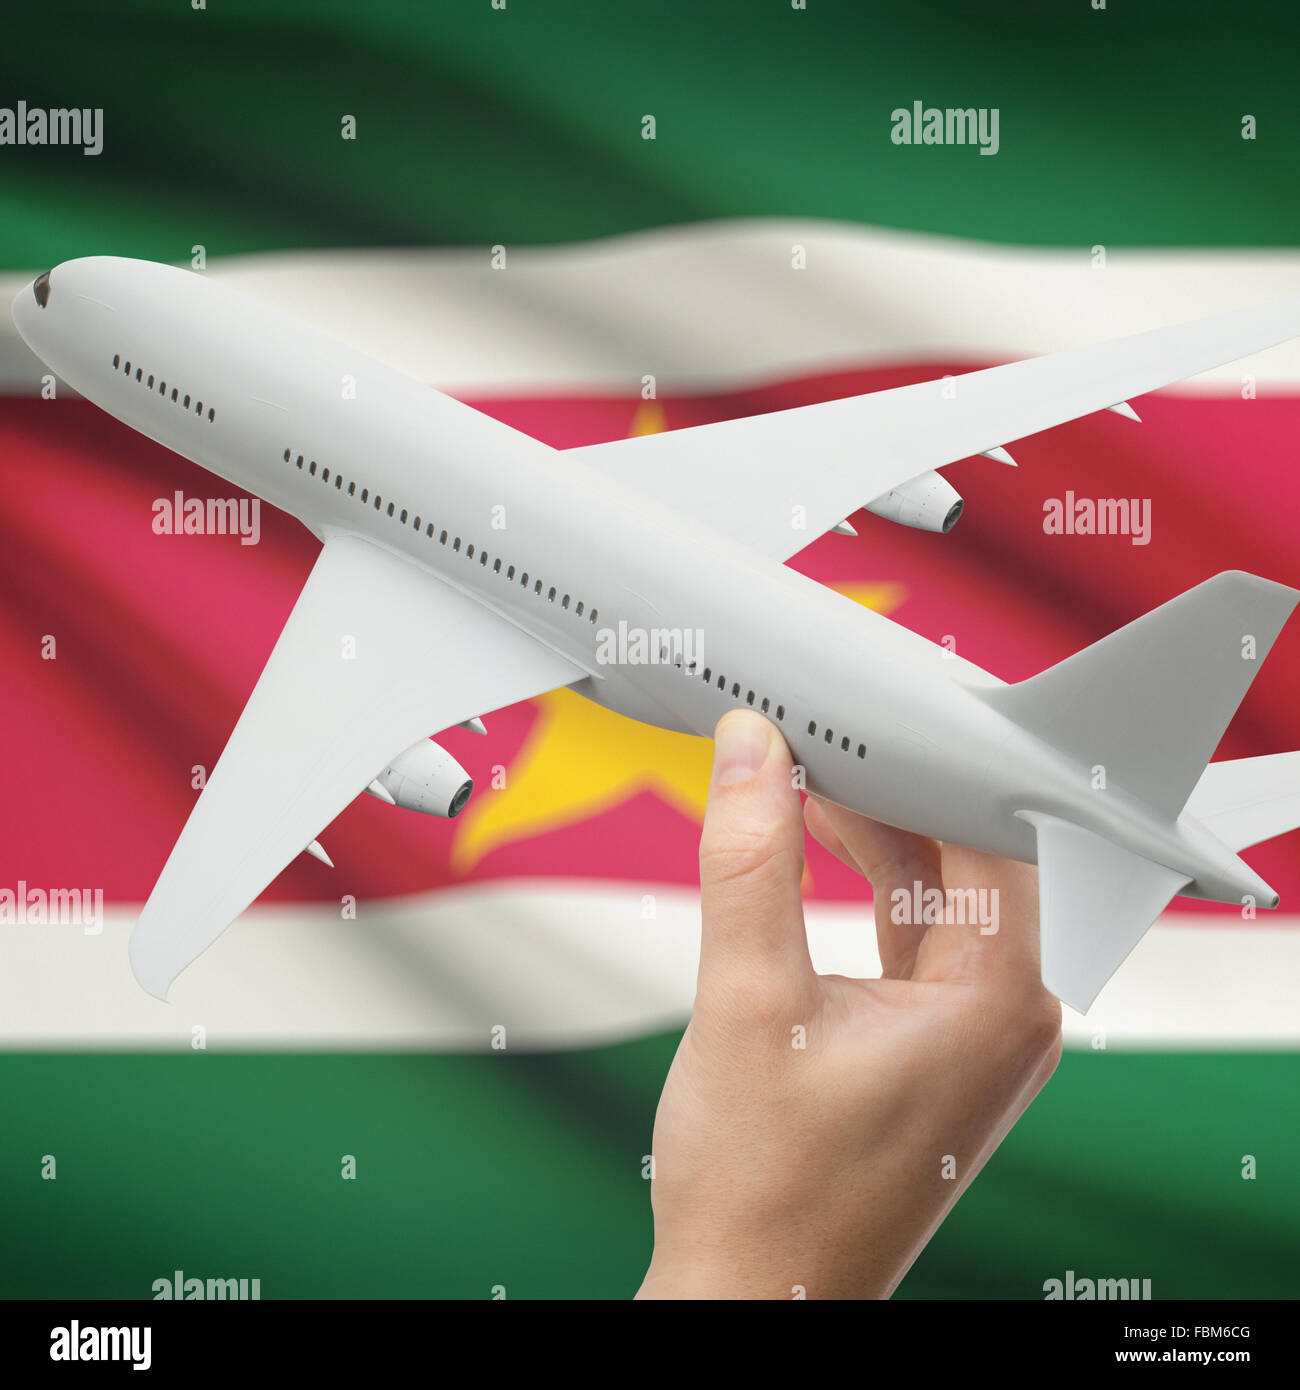 Airplane in hand with national flag on background series - Suriname Stock Photo